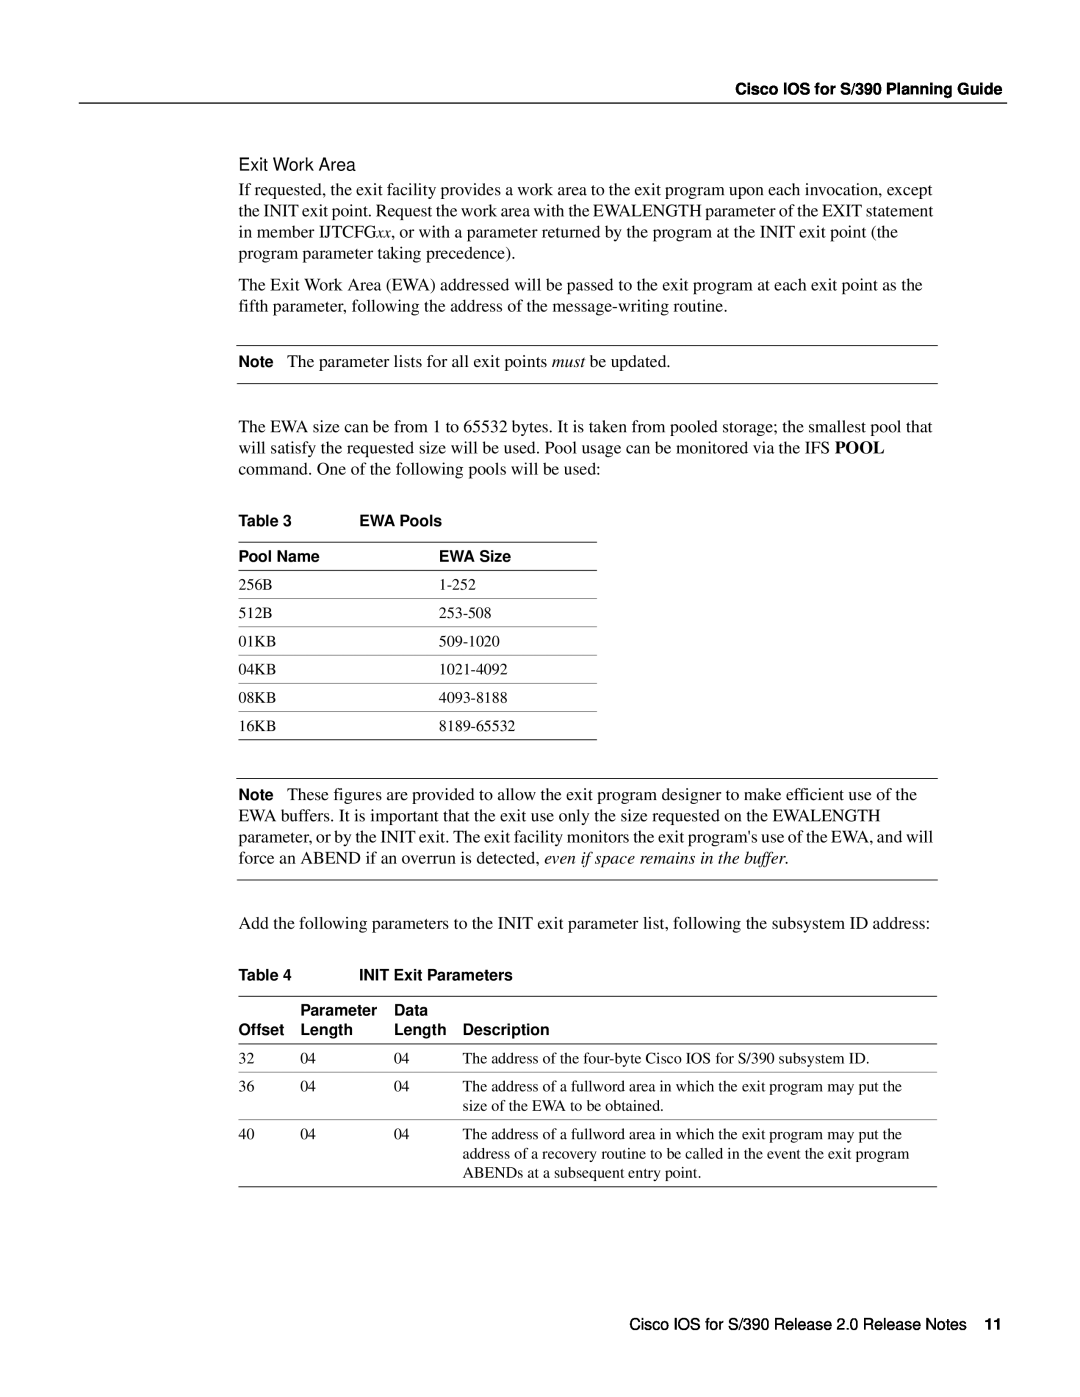 Cisco Systems S/390 manual Note The parameter lists for all exit points must be updated 